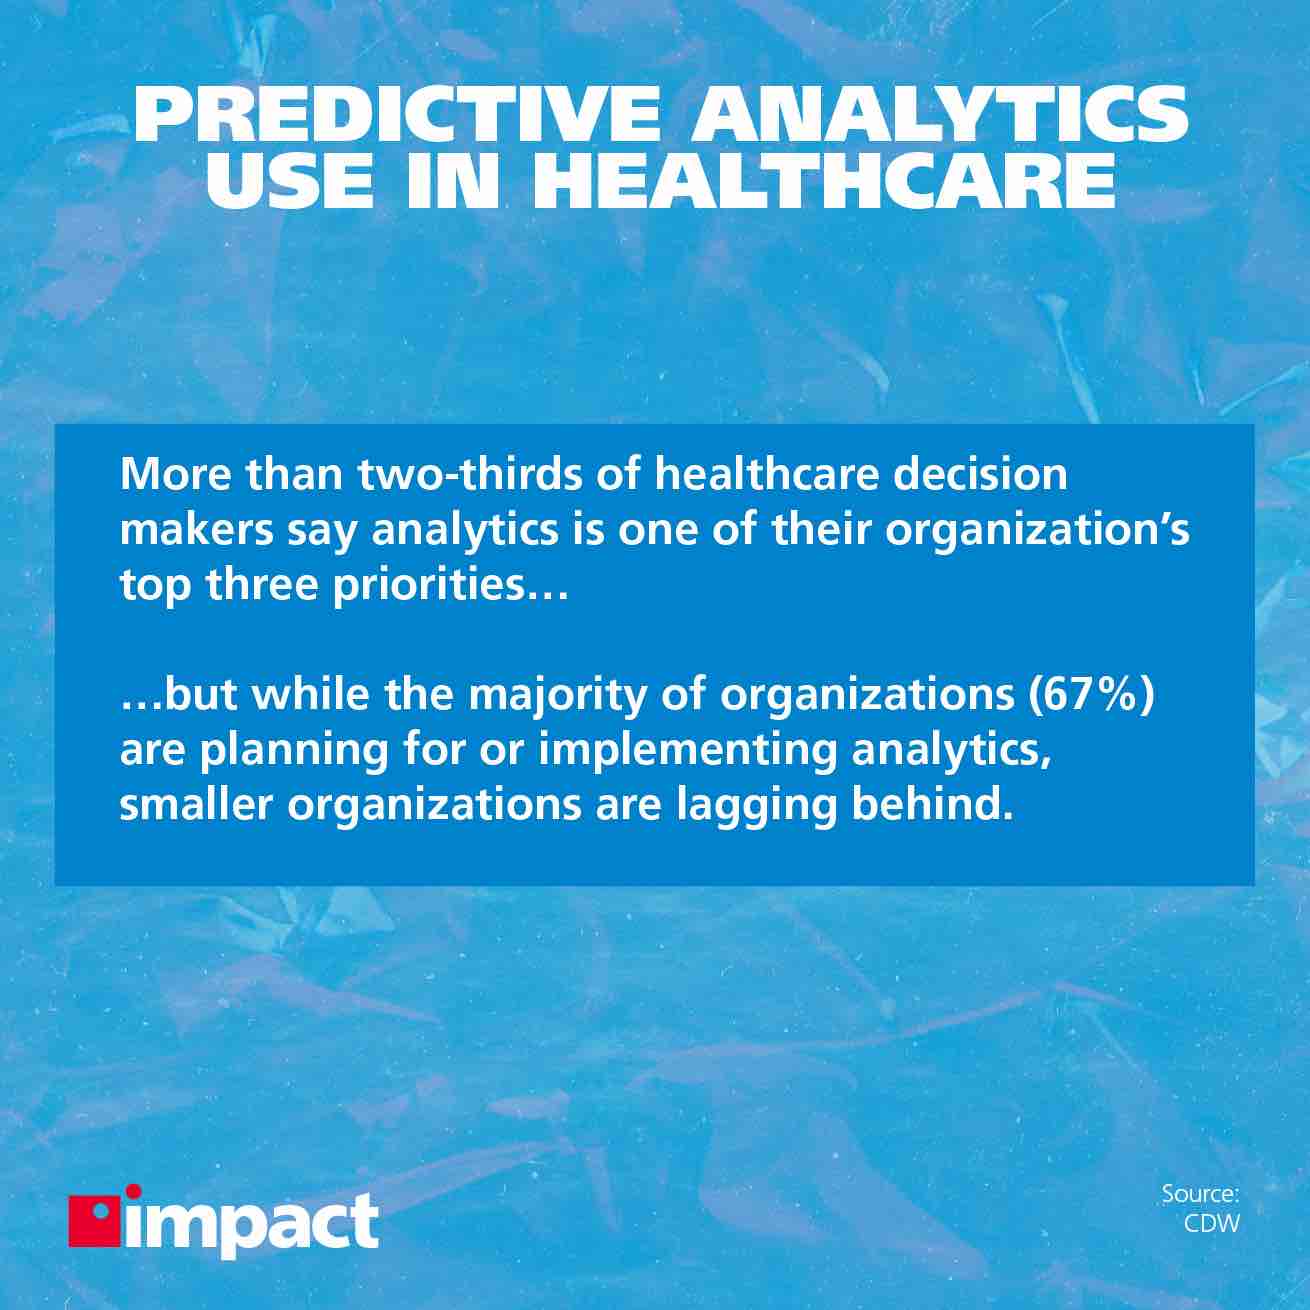 two-thirds of healthcare decision makers say analytics is one of their top three priorities